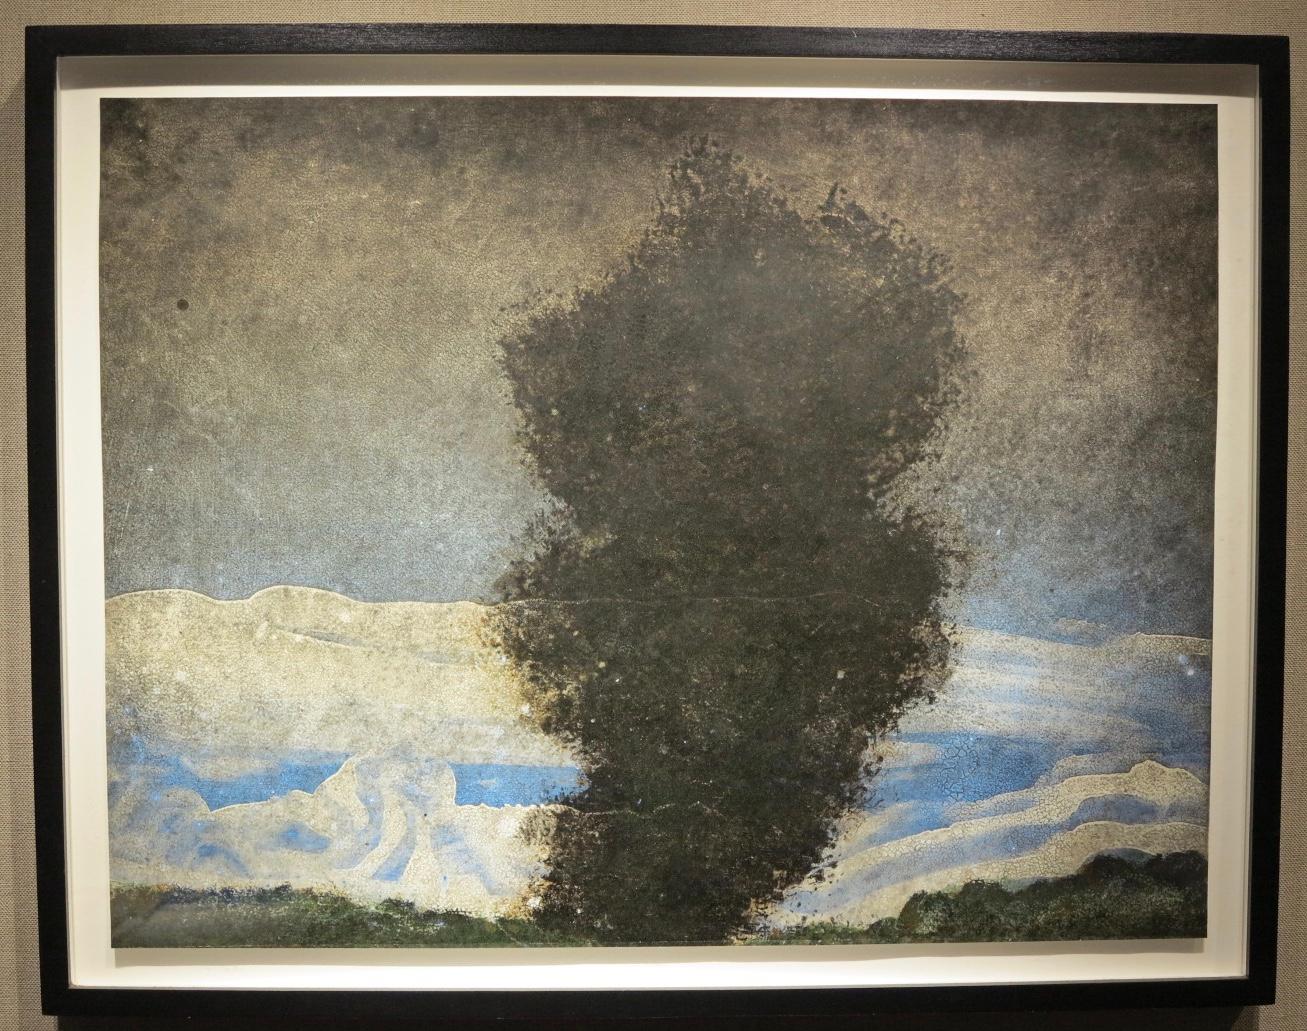 Frank Faulkner (b.1946). Obscured Landscape, 2007. Acrylic on paper, 19 x 25 inches; 22 x 28 inches framed. Black wood float frame with UV plexi. Excellent condition with no damage or restoration. Signed and dated en verso. 

Born in Sumter, South